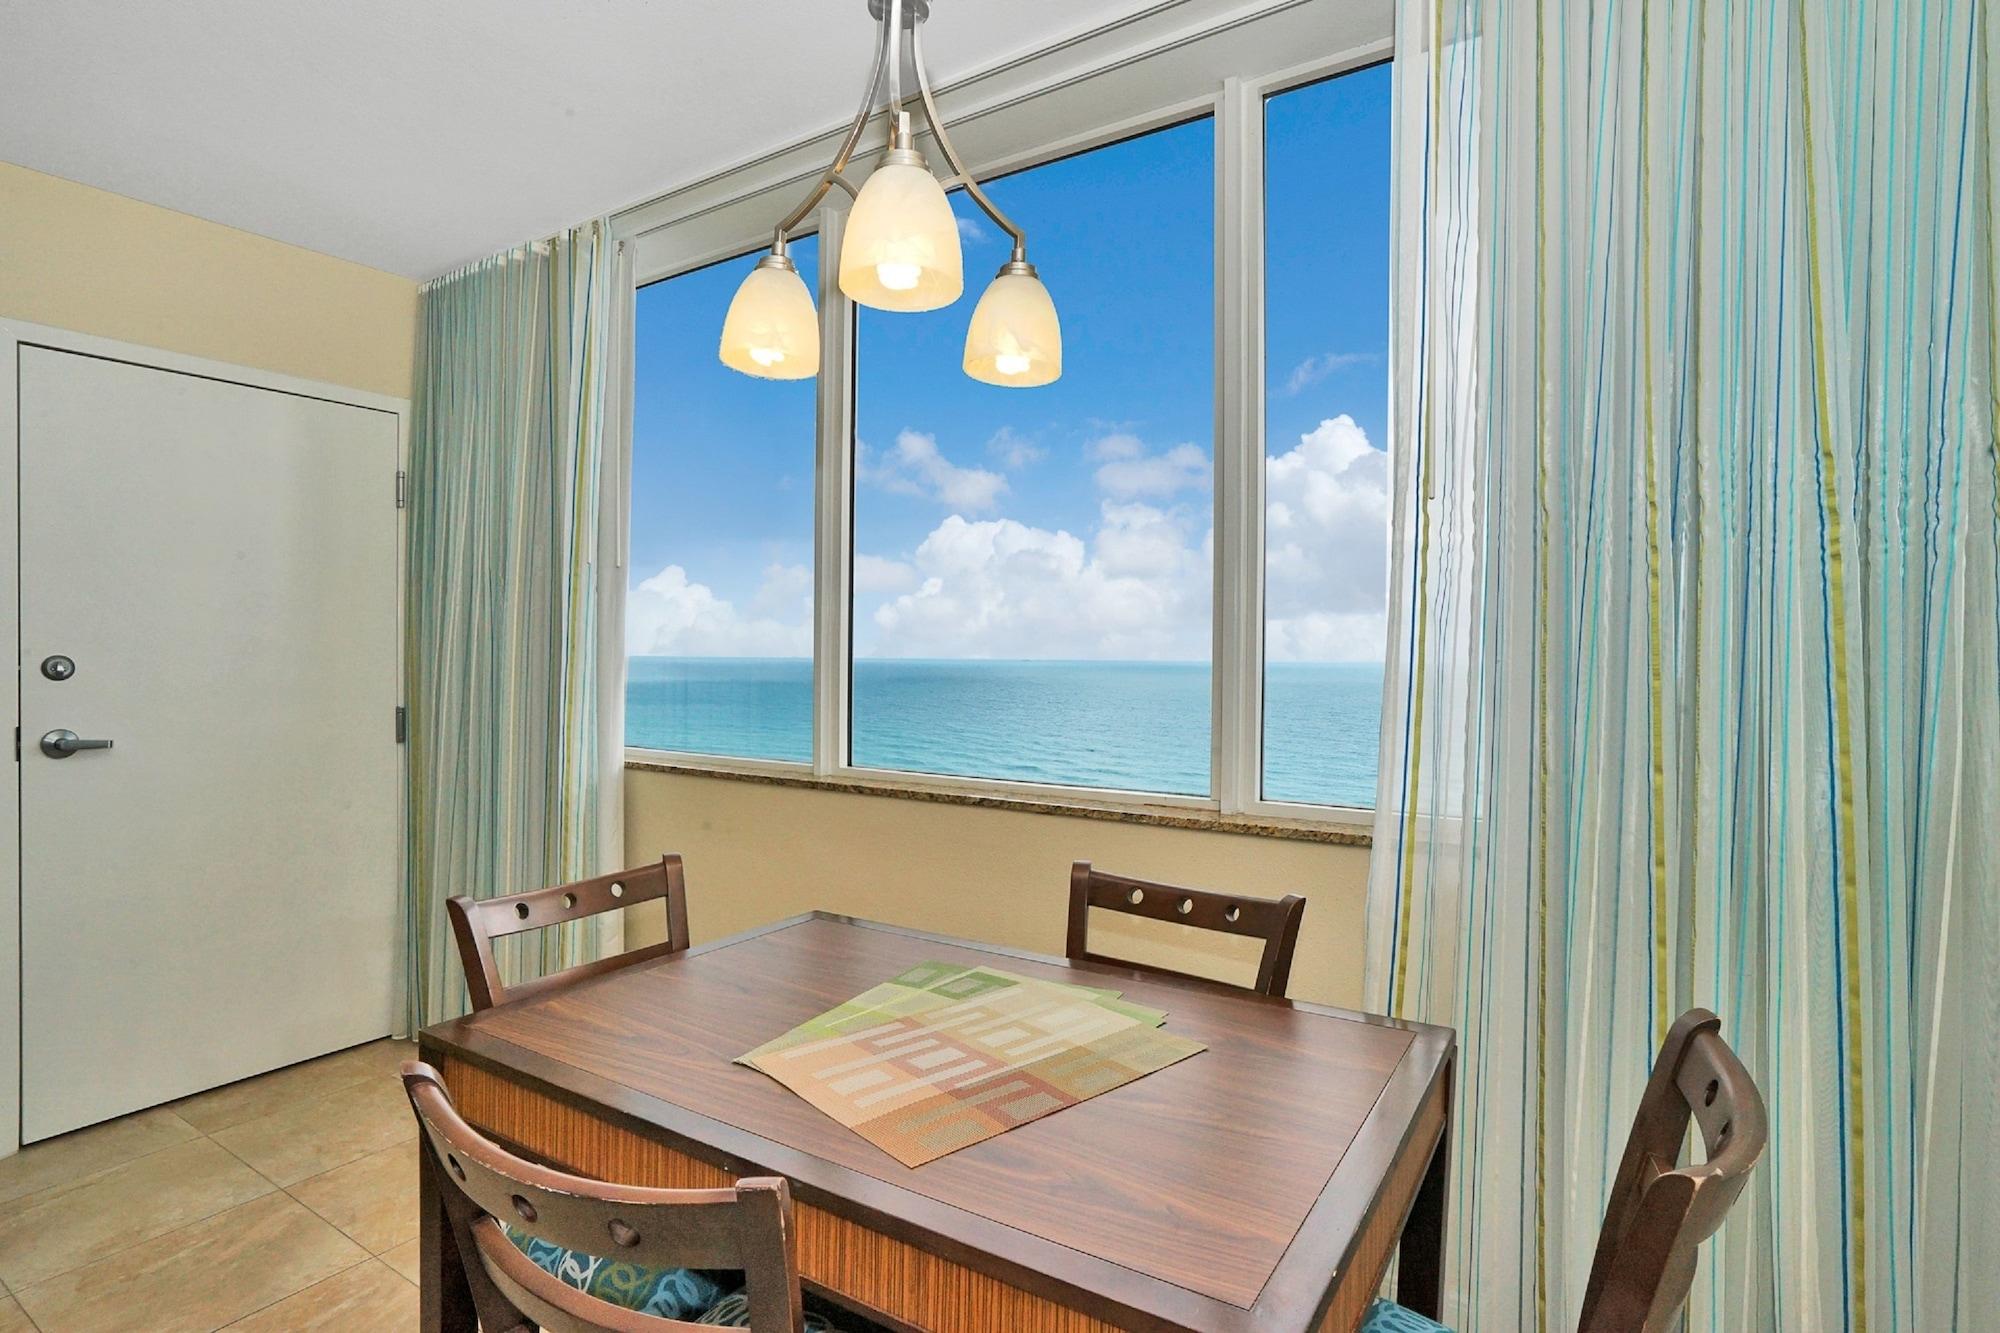 Hollywood Beach Tower By Capital Vacations ภายนอก รูปภาพ